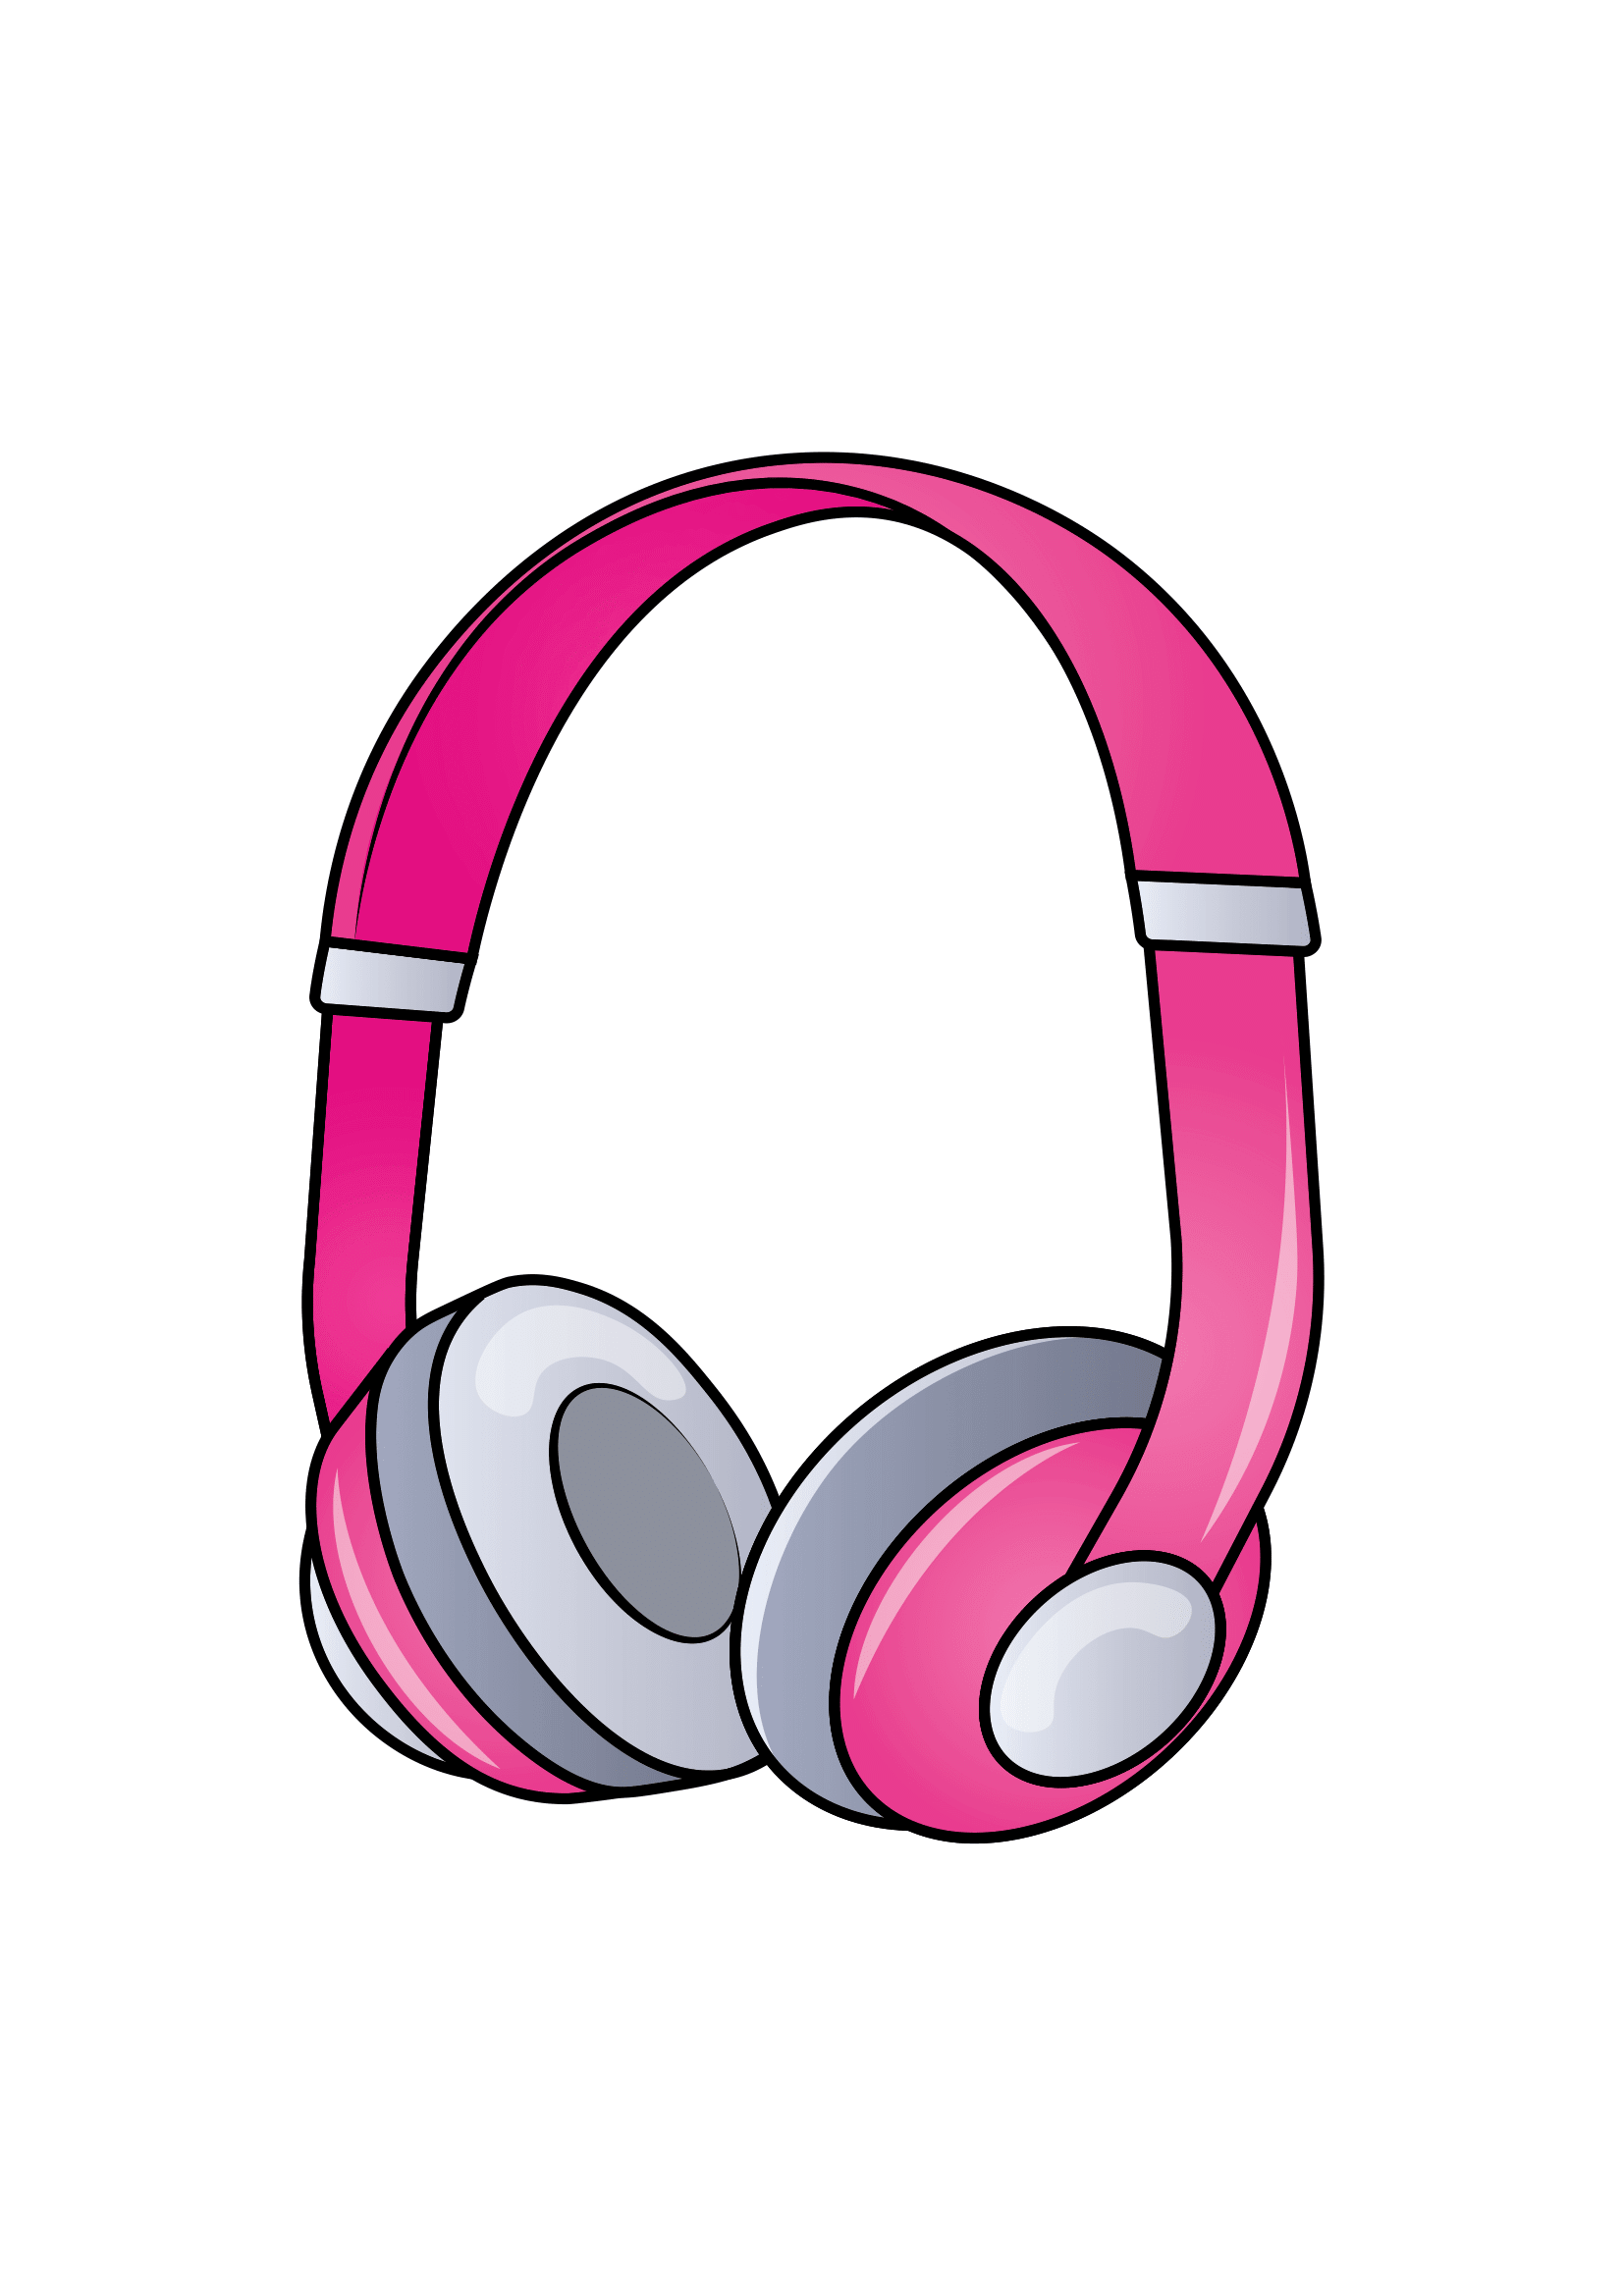 How to Draw Headphones Step by Step Printable